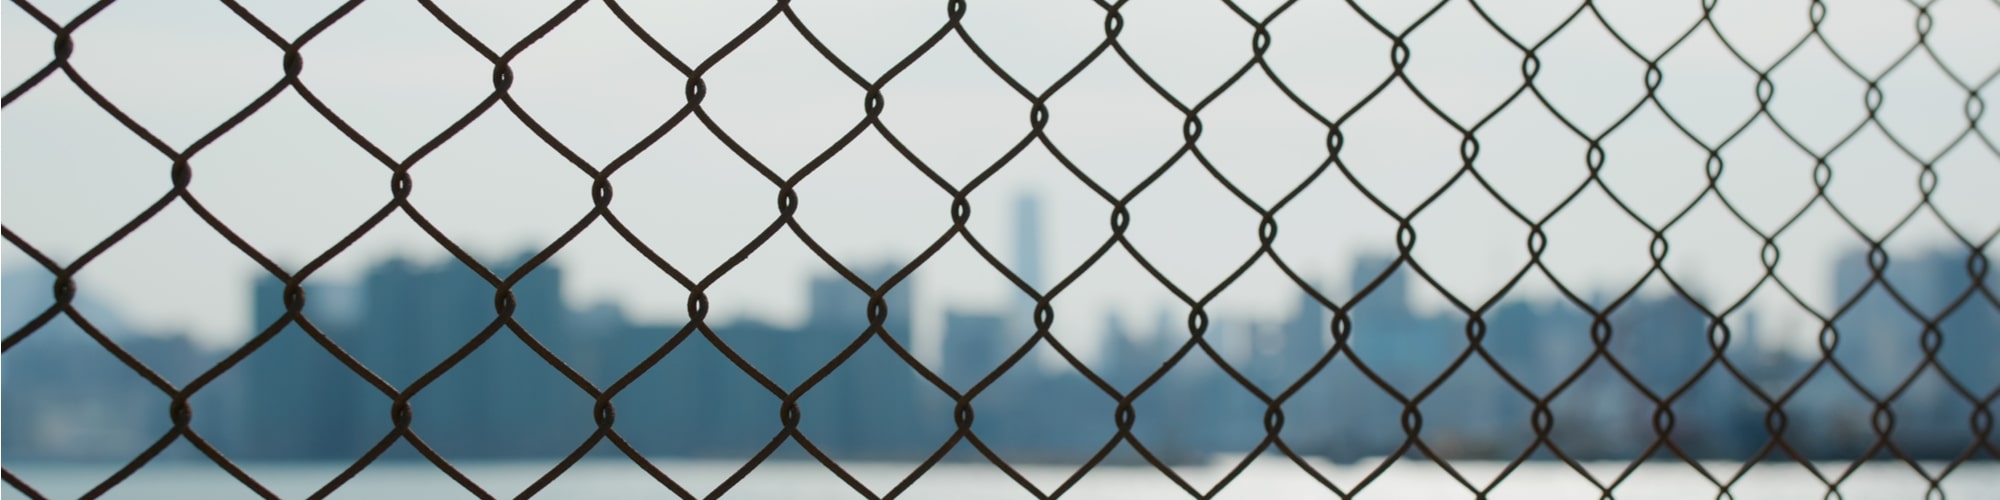 Chain link fence in city